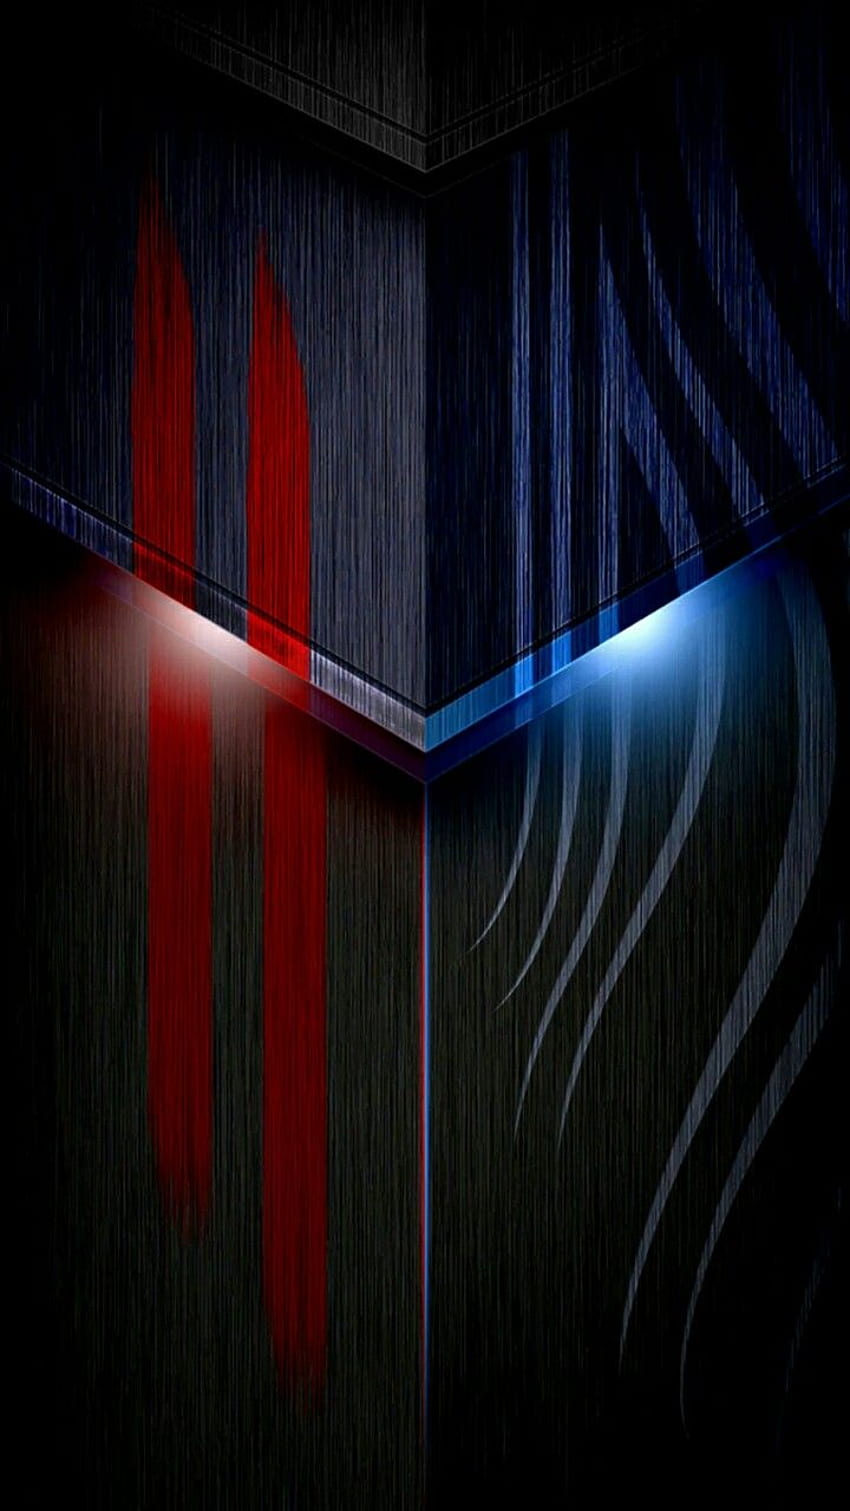 cool red and blue backgrounds